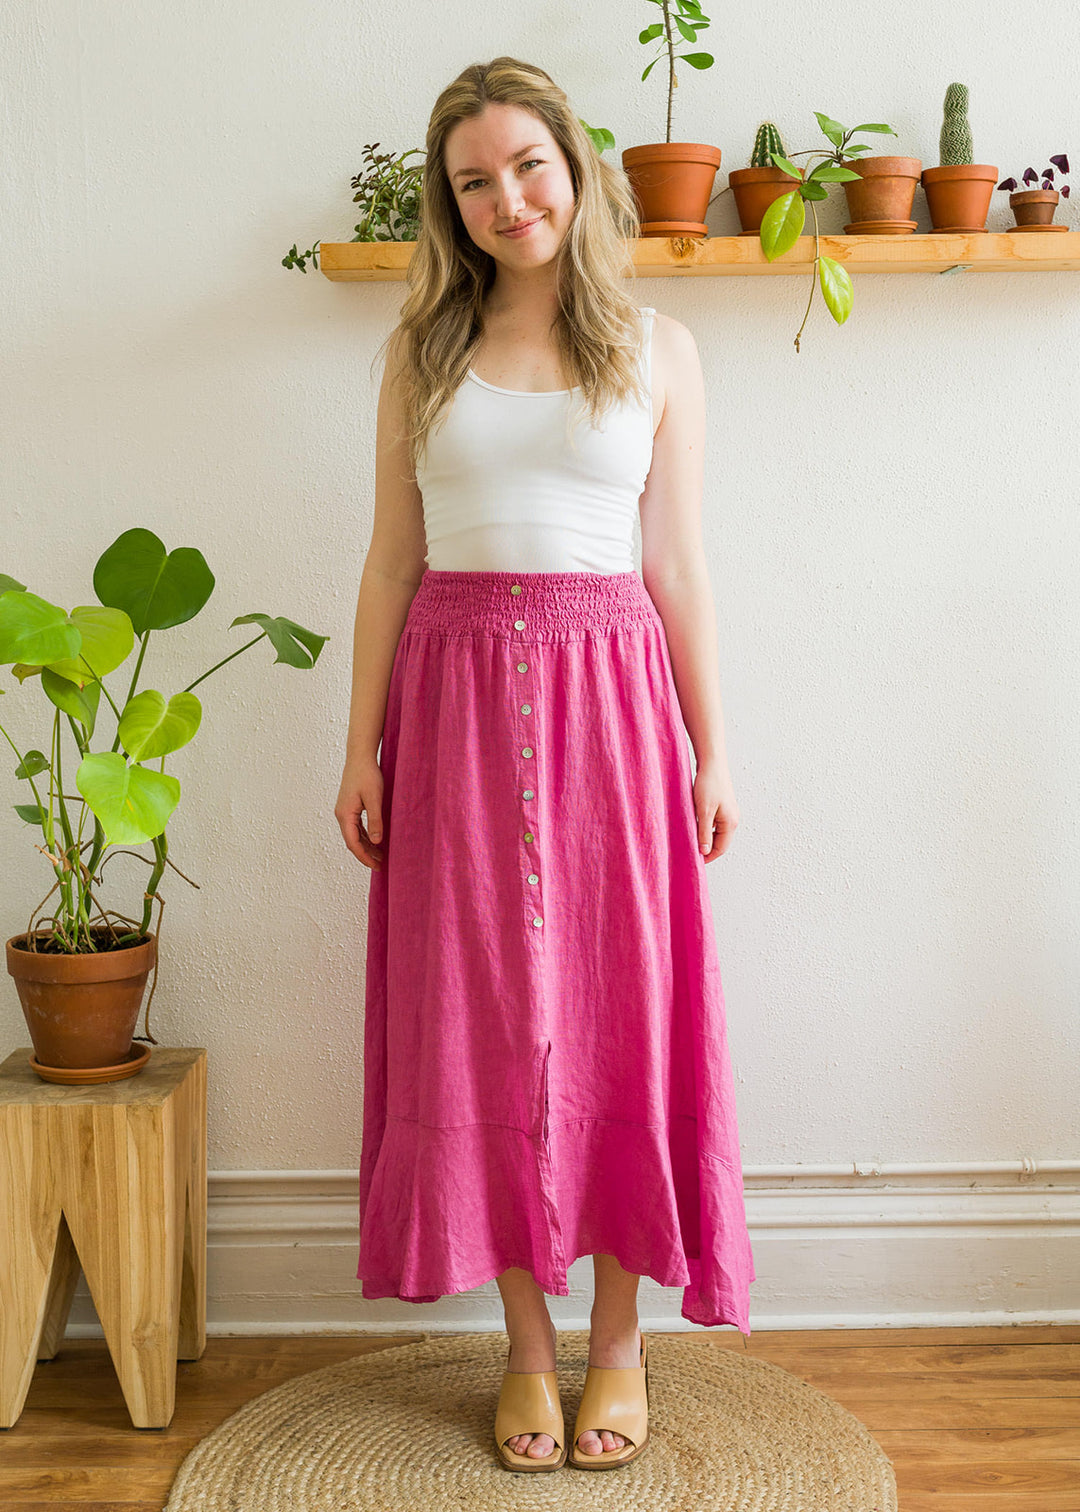 Cottage-core 100% linen maxi skirt with buttons and elastic waist